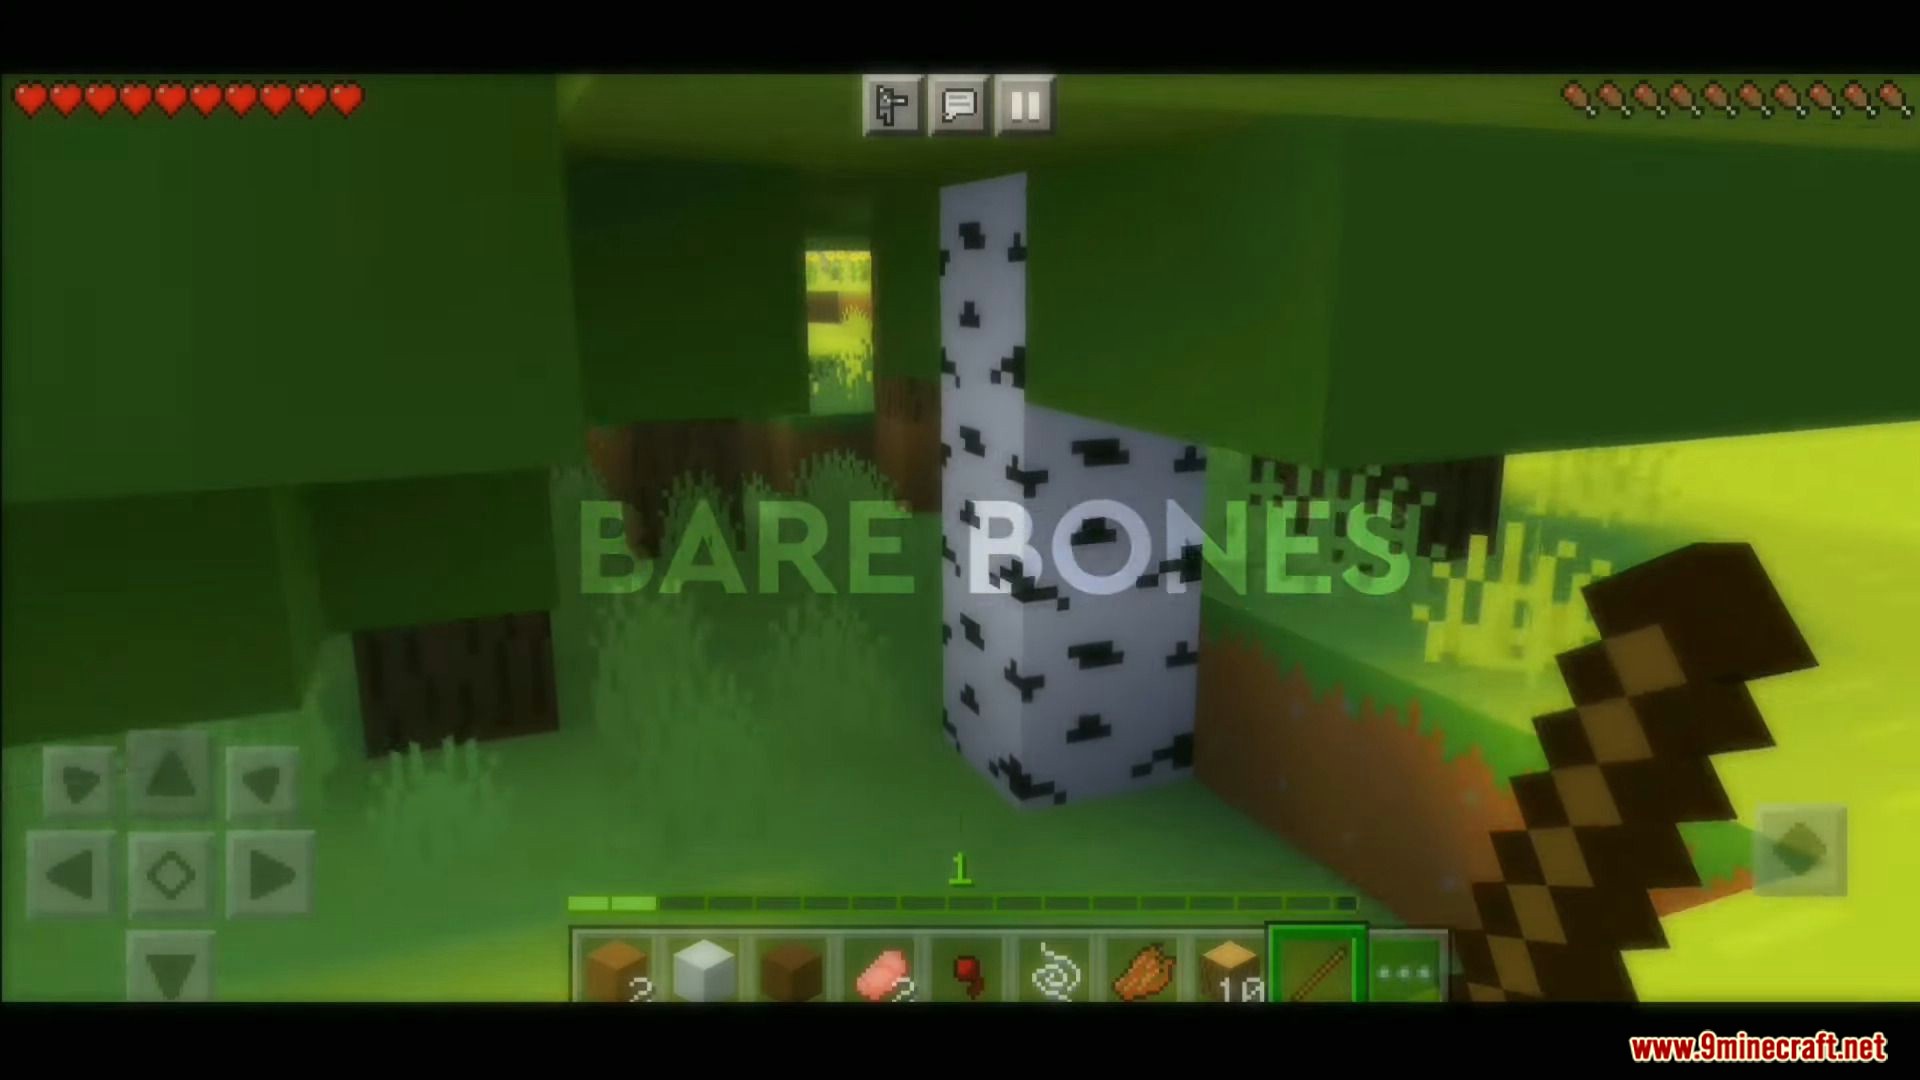 I used shaders and the bare bones texture pack to make minecraft pocked  edition look like the trailers : r/Minecraft